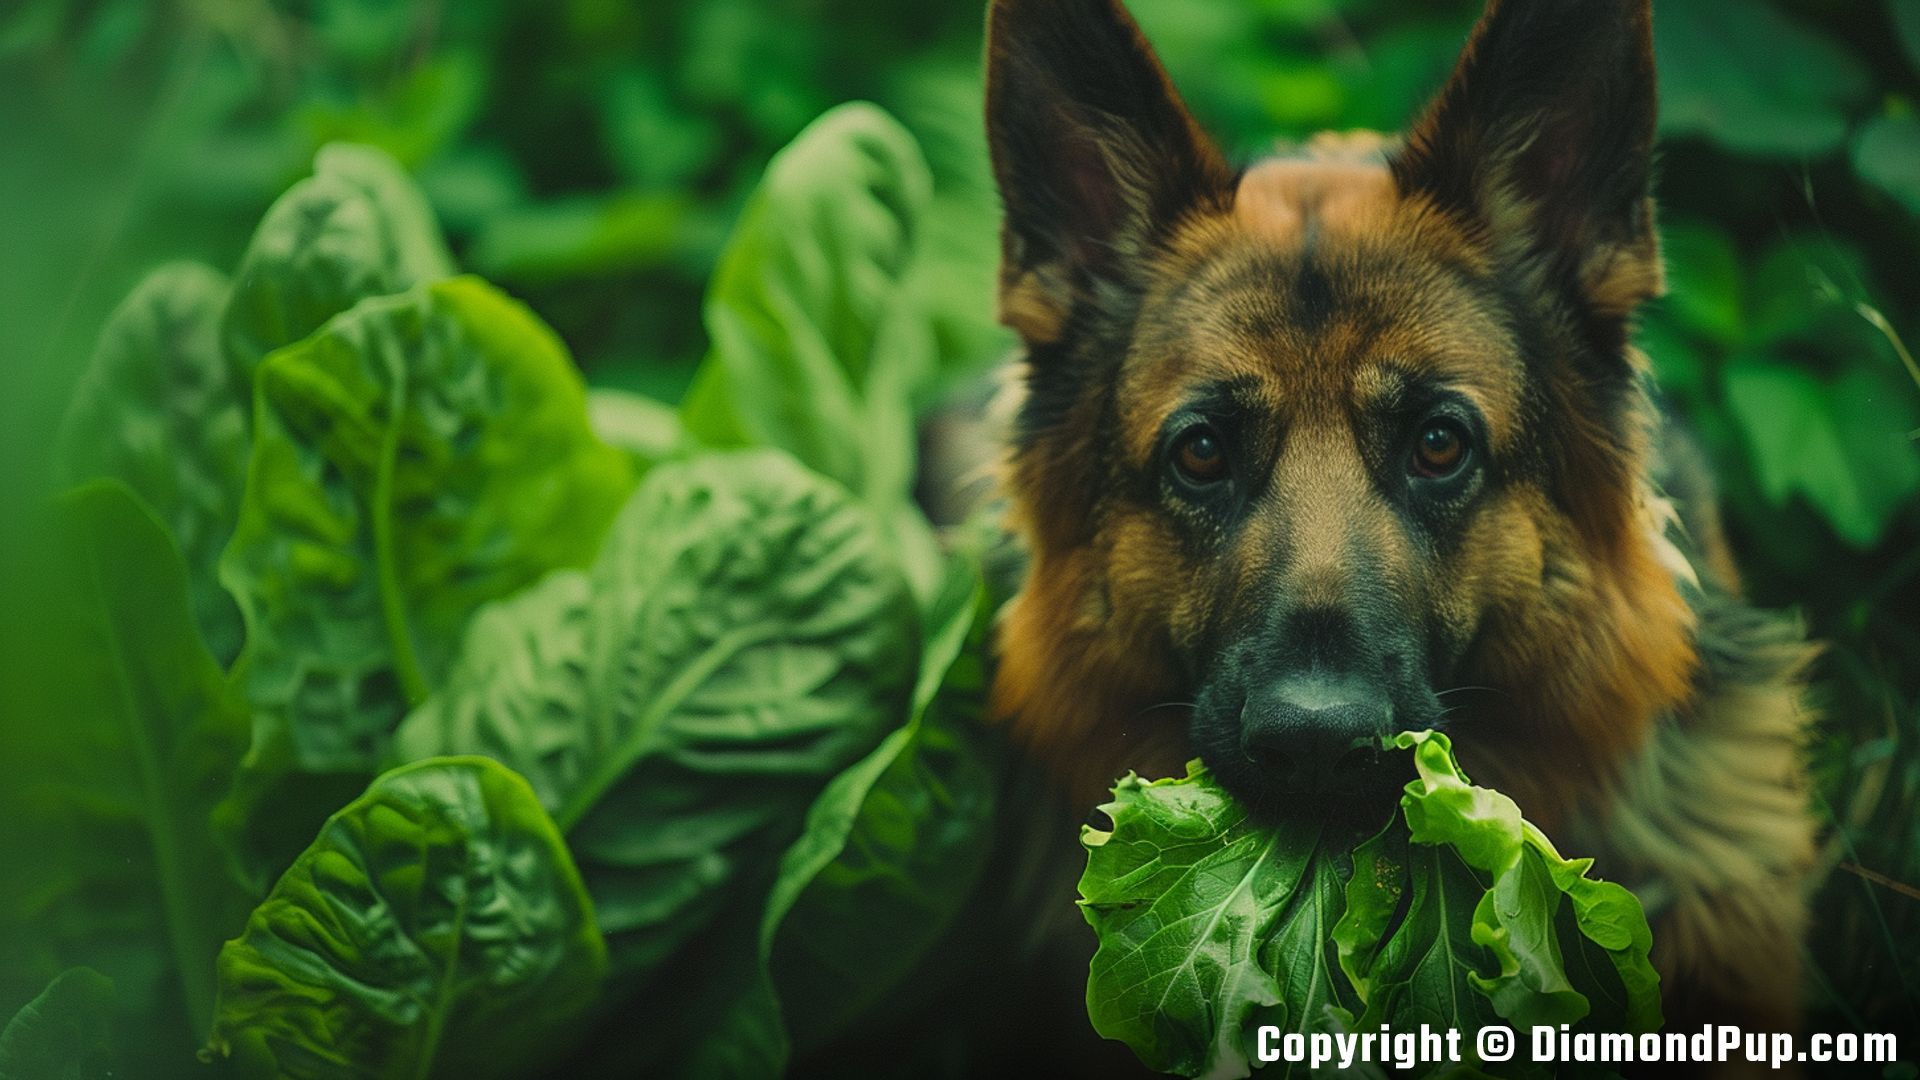 Photograph of a Cute German Shepherd Snacking on Lettuce